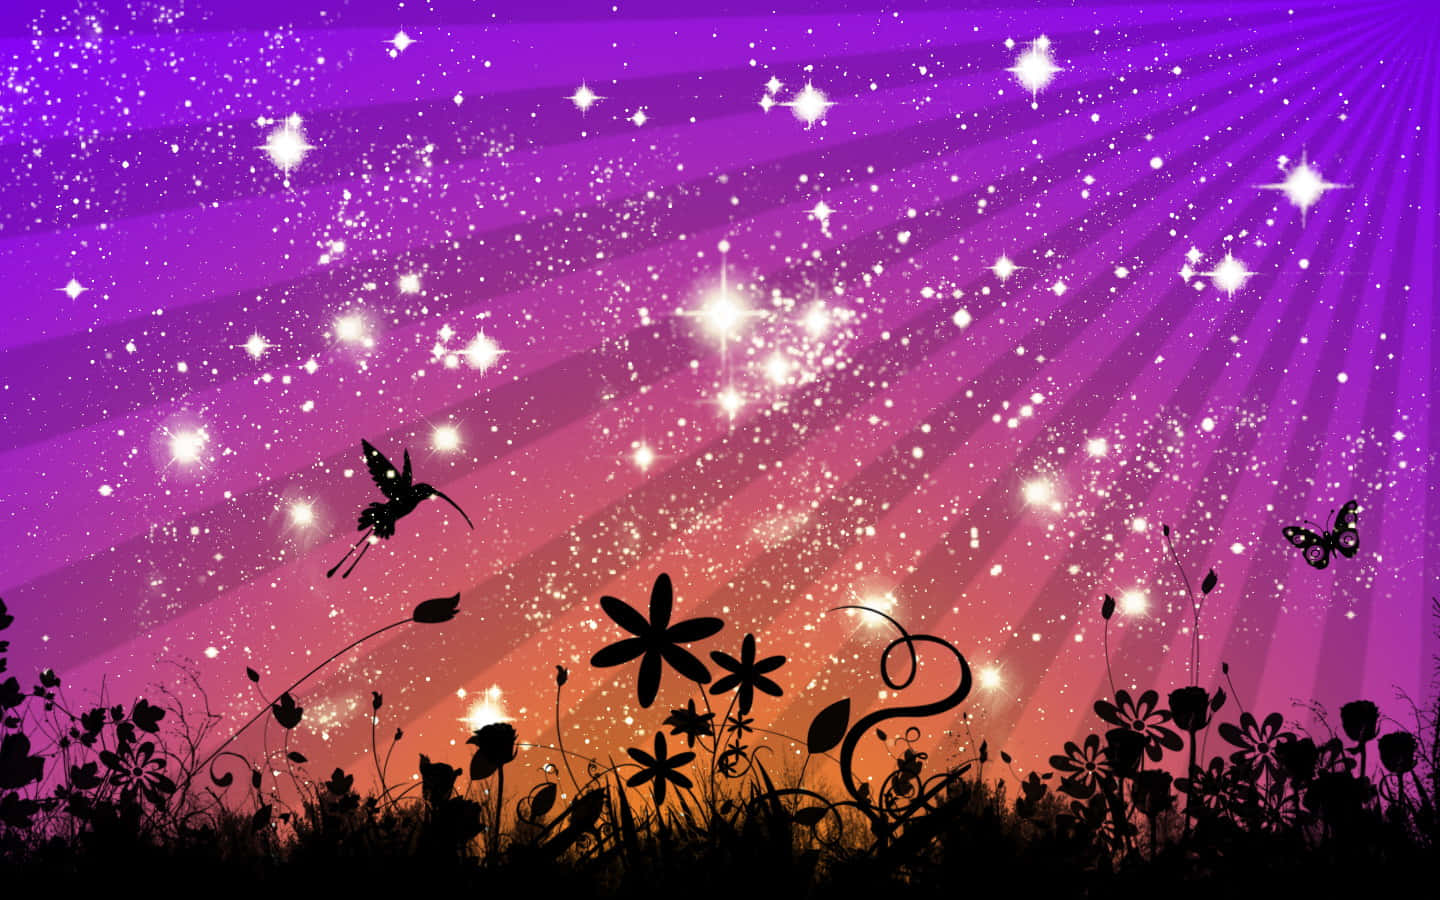 Ethereal Star Shining Brightly in a Celestial Sky Wallpaper